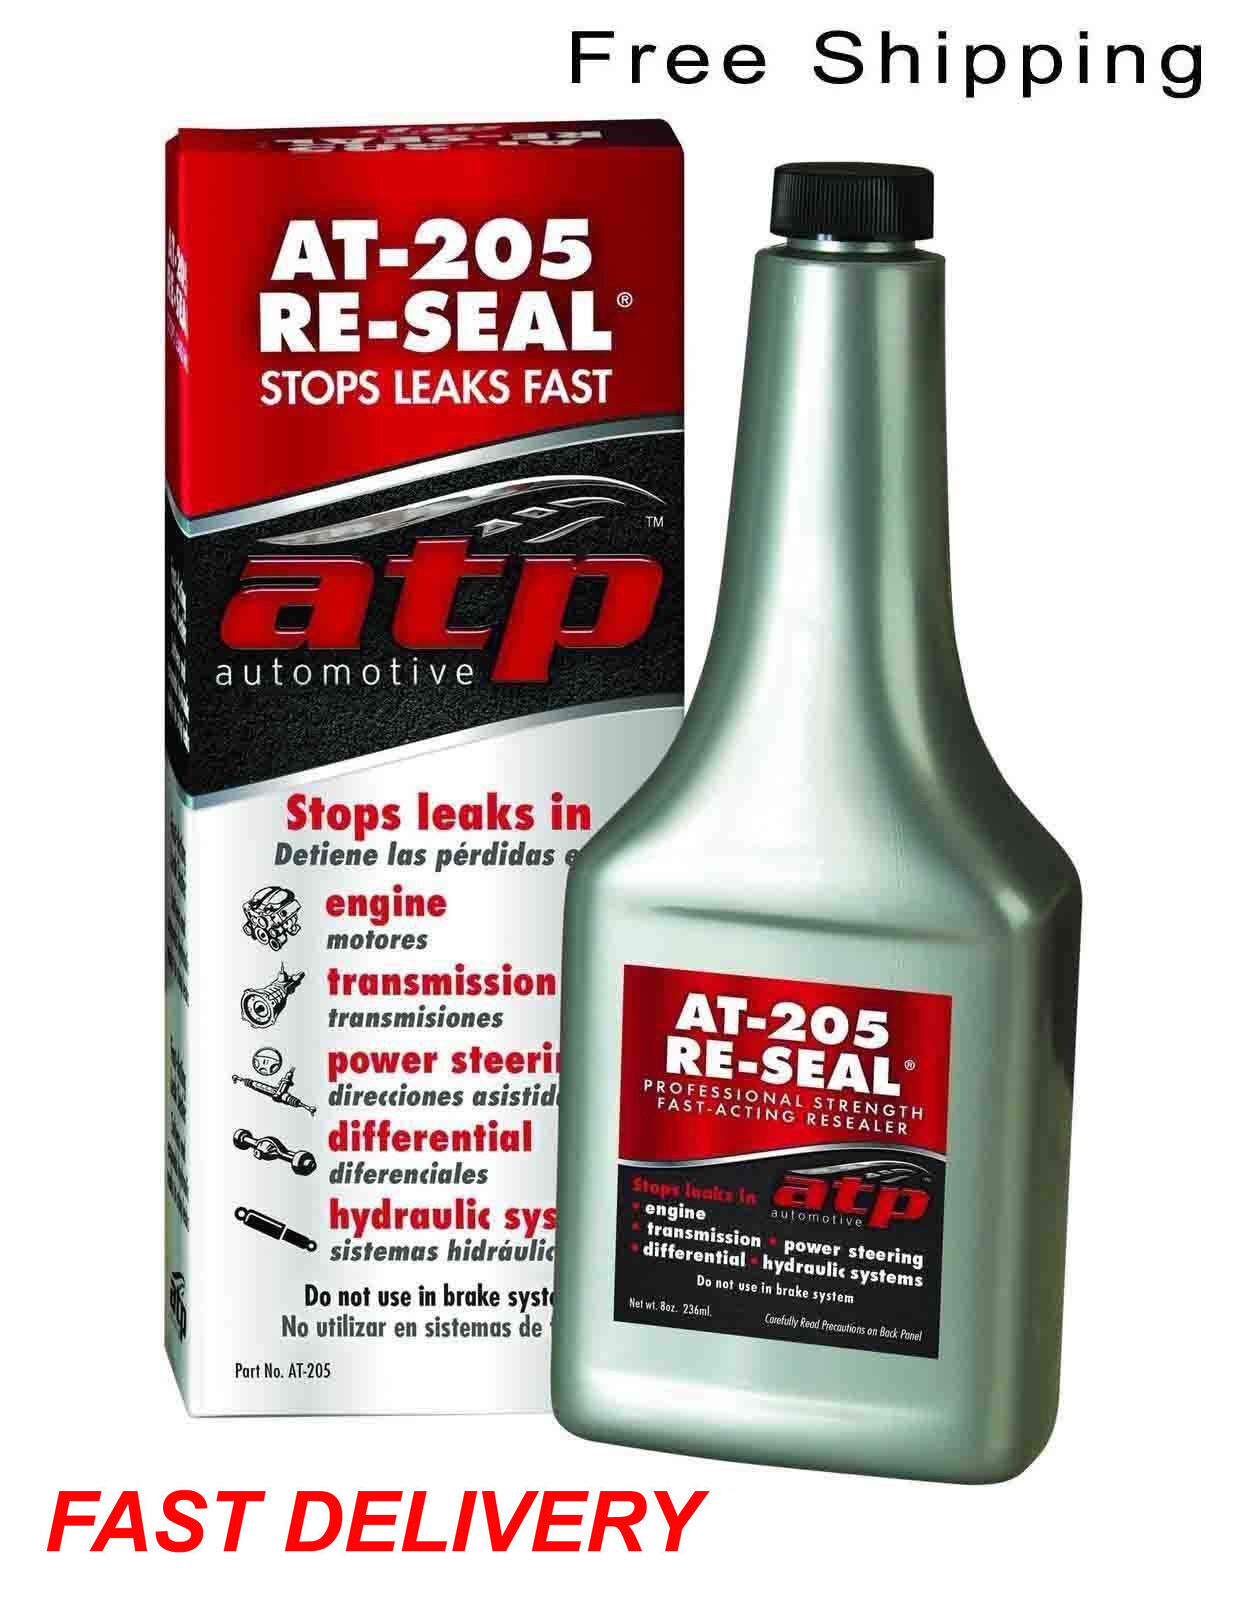 ATP AT-205 Re-Seal Fast Effective Stops Leaks 8 Ounce Bottle